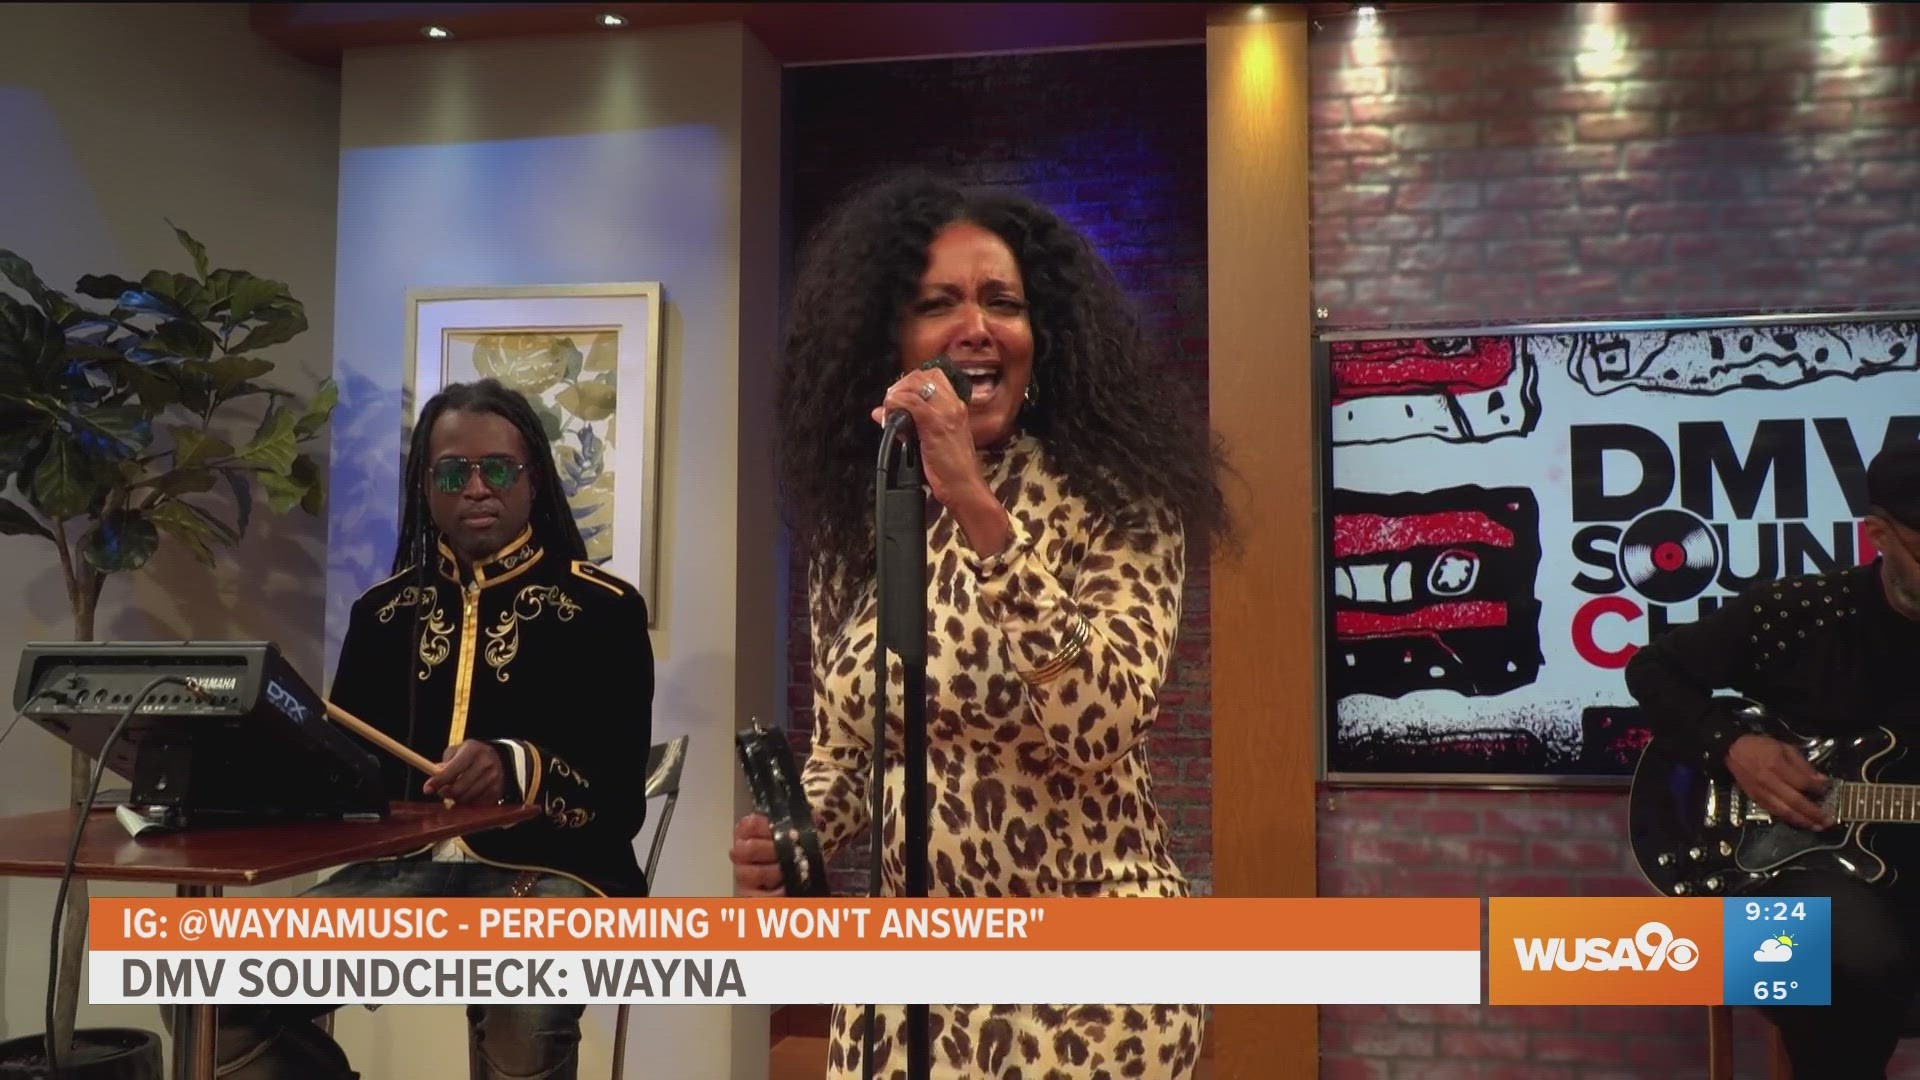 Ethiopian-born, DC based, and Grammy nominated singer/actress Wayna visits the DMV Soundcheck to perform her latest song called "I Won't Answer". IG: @waynamusic.